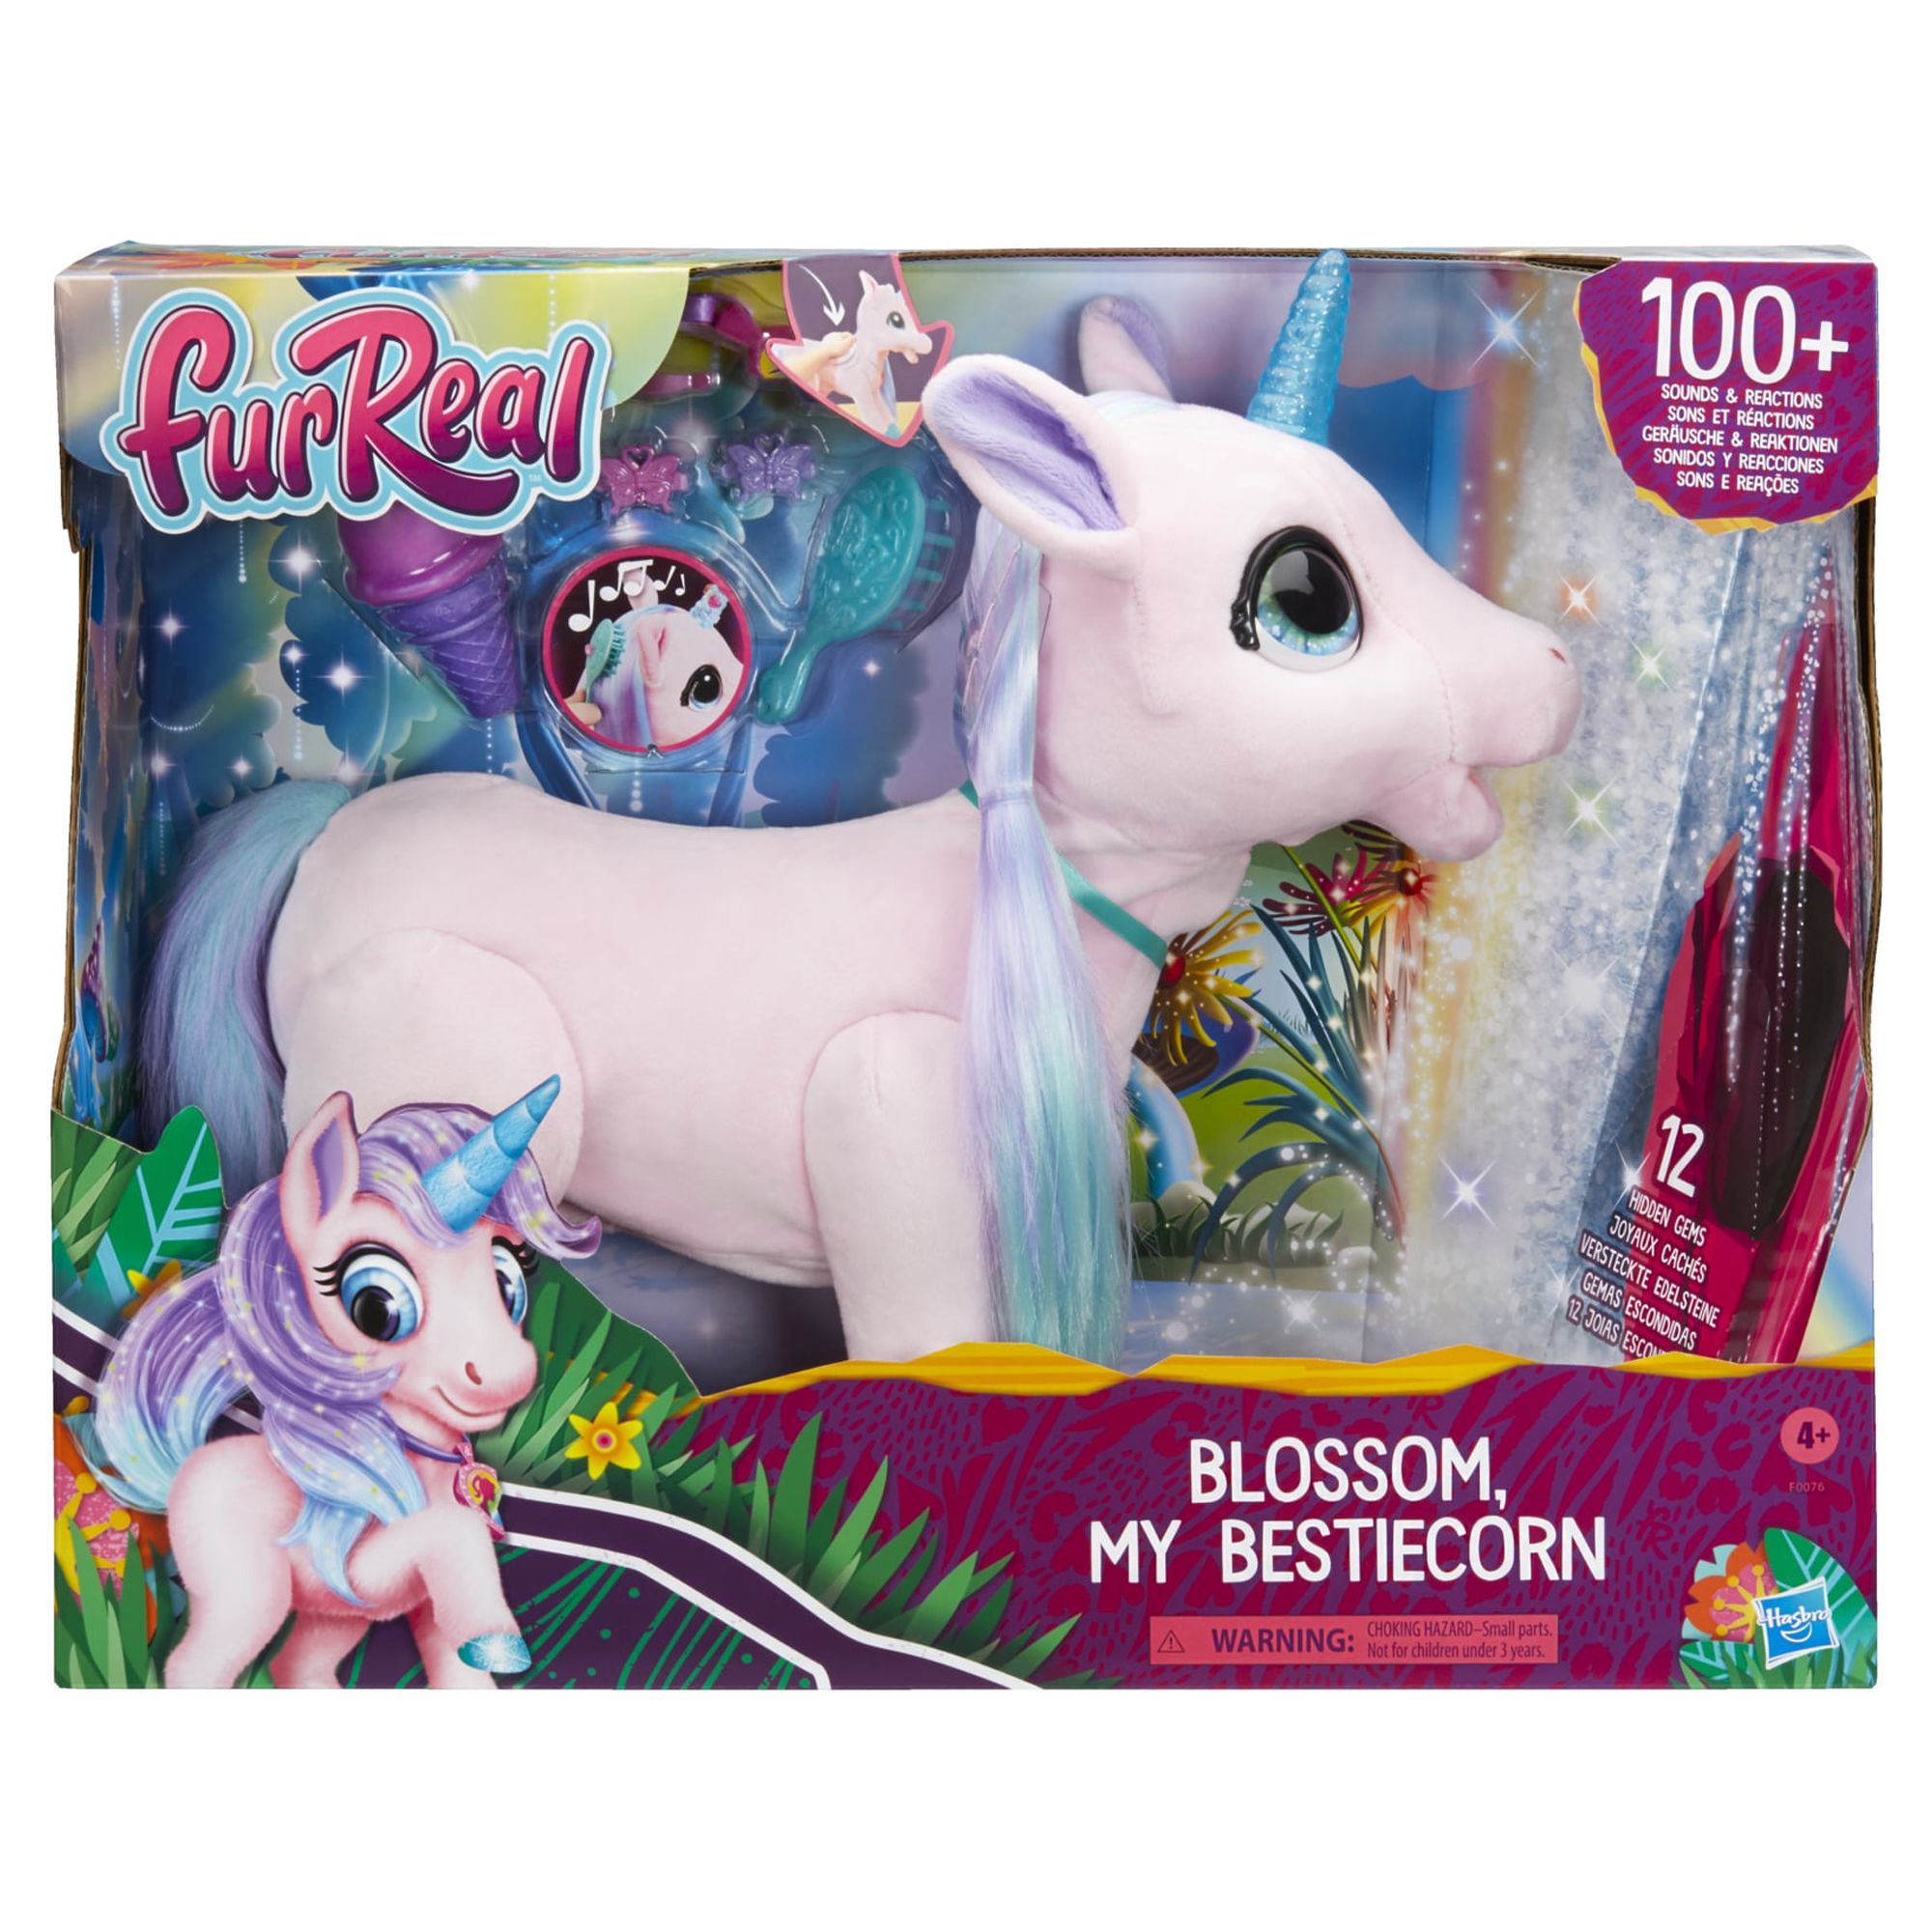 furReal Blossom My Bestiecorn Interactive Plush Pet Toy, 100+ Sounds & Reactions - image 3 of 9